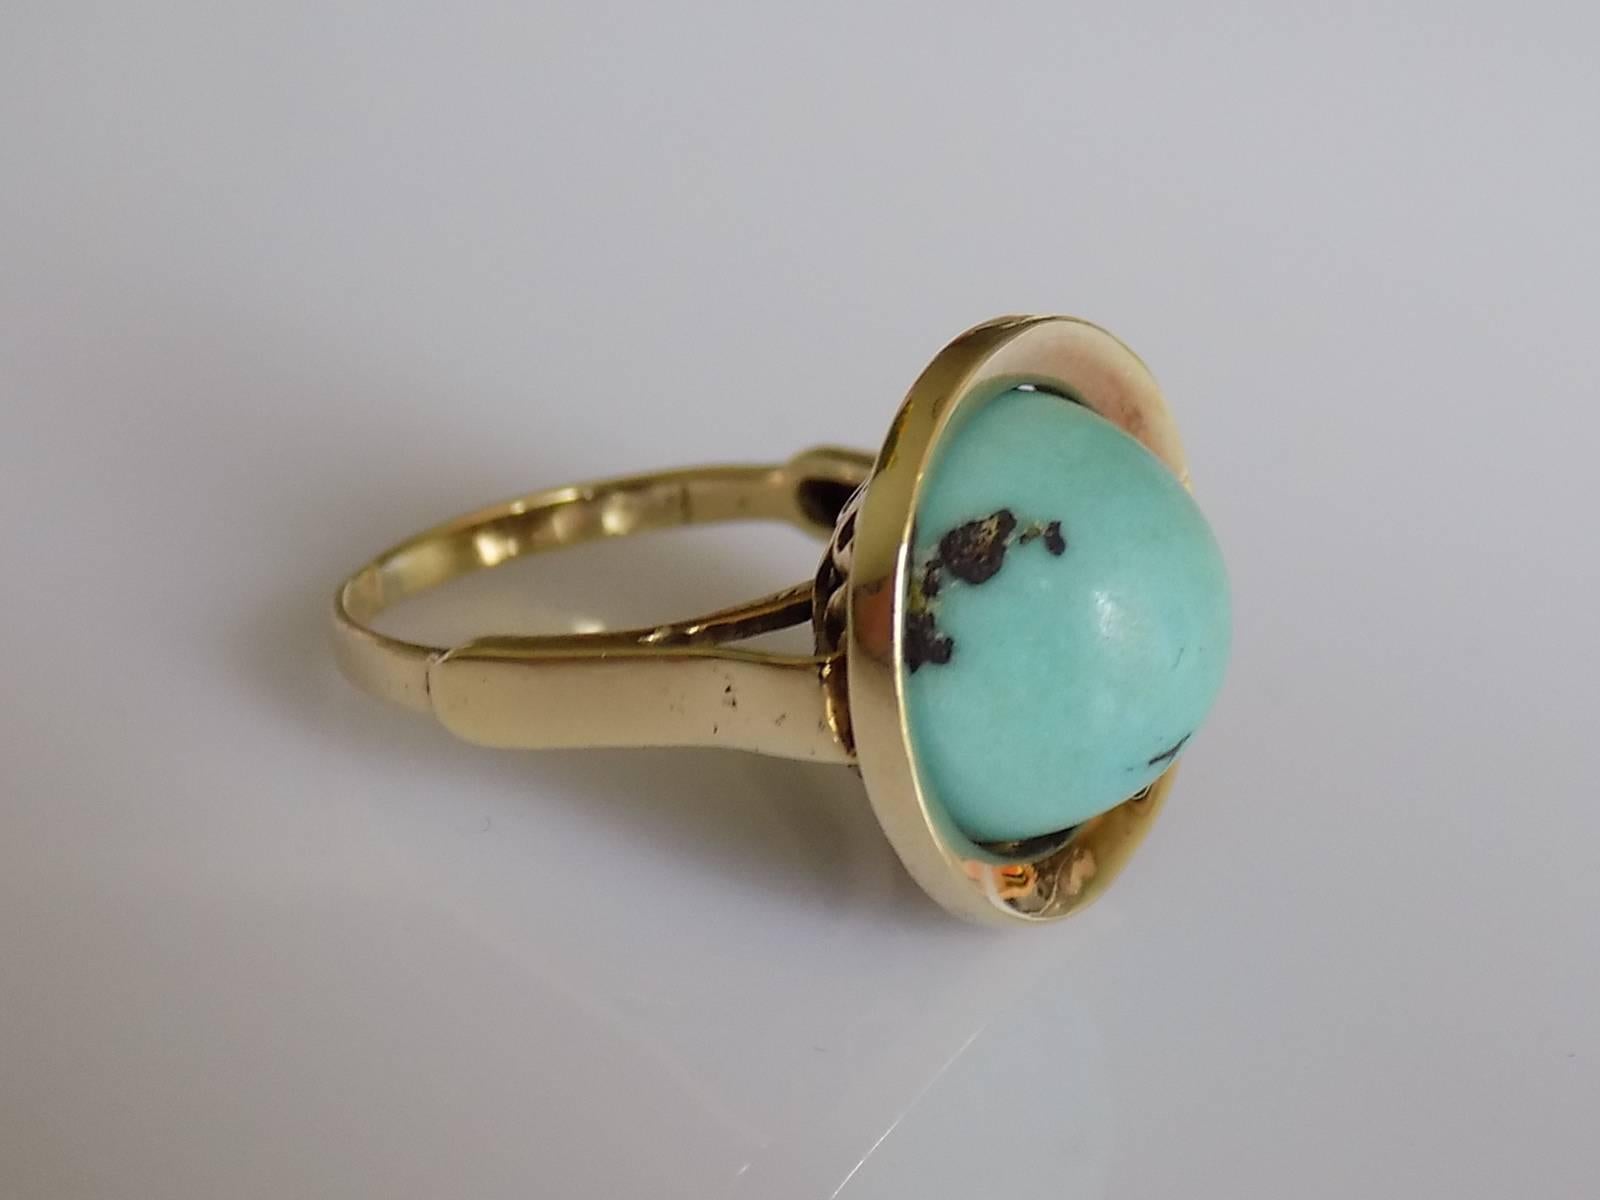 Highly Unusual Antique early 1900s 14 Carat Yellow Gold and Dome shaped Turquoise Matrix solitaire ring. Turquoise in an intricate bascket style setting. Oustanding looking ring.
Size L UK, 6 US 
Width of the face 17mm
Weight 5.9gr
Tested 14 Carat